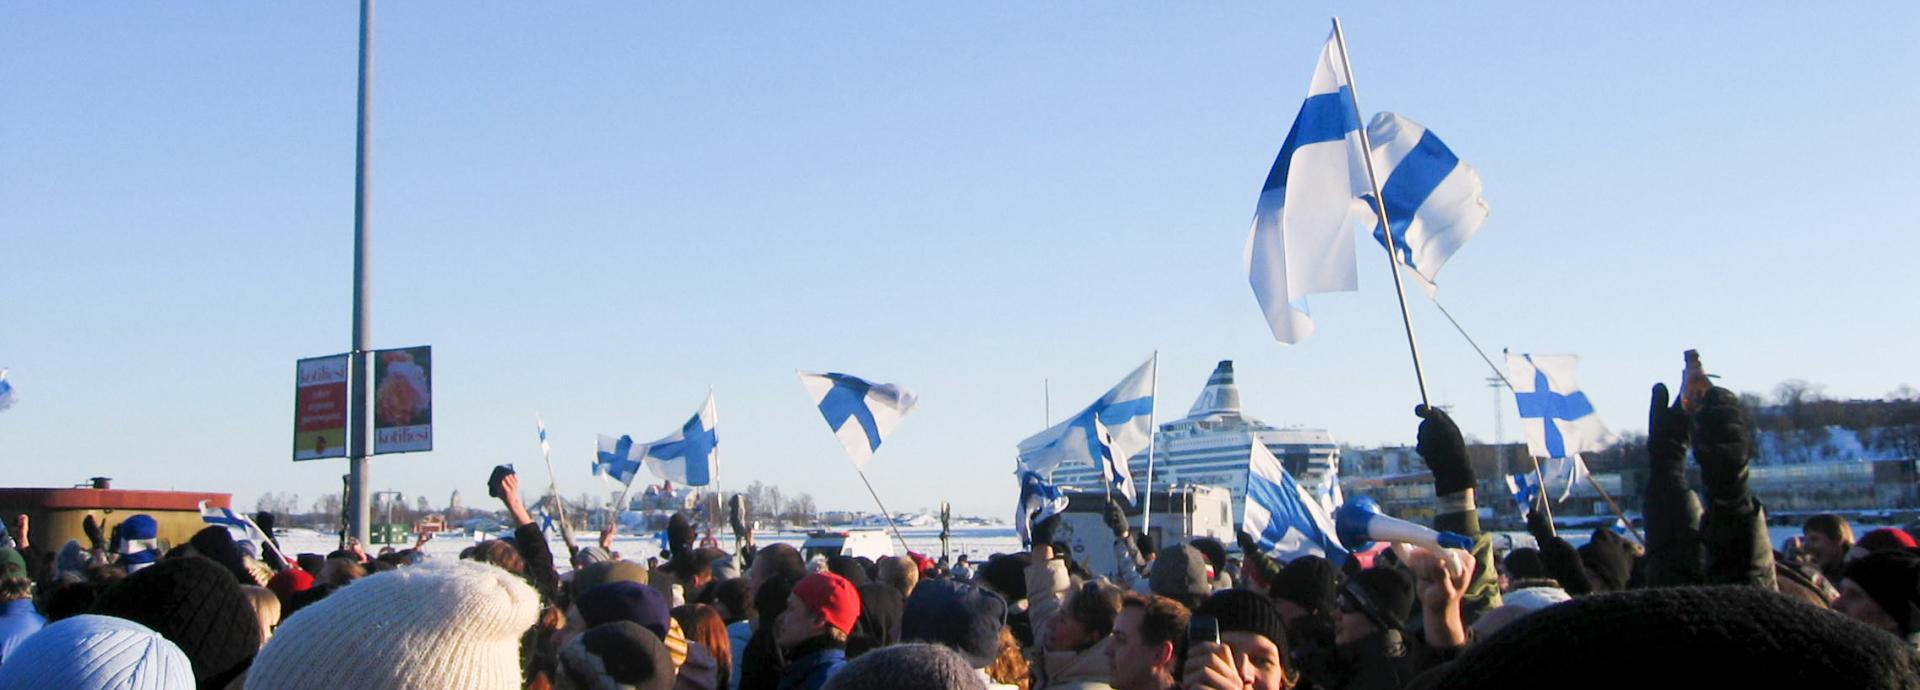 A big crowd of people at the Helsinki Market Square during winter waving Finnish flags